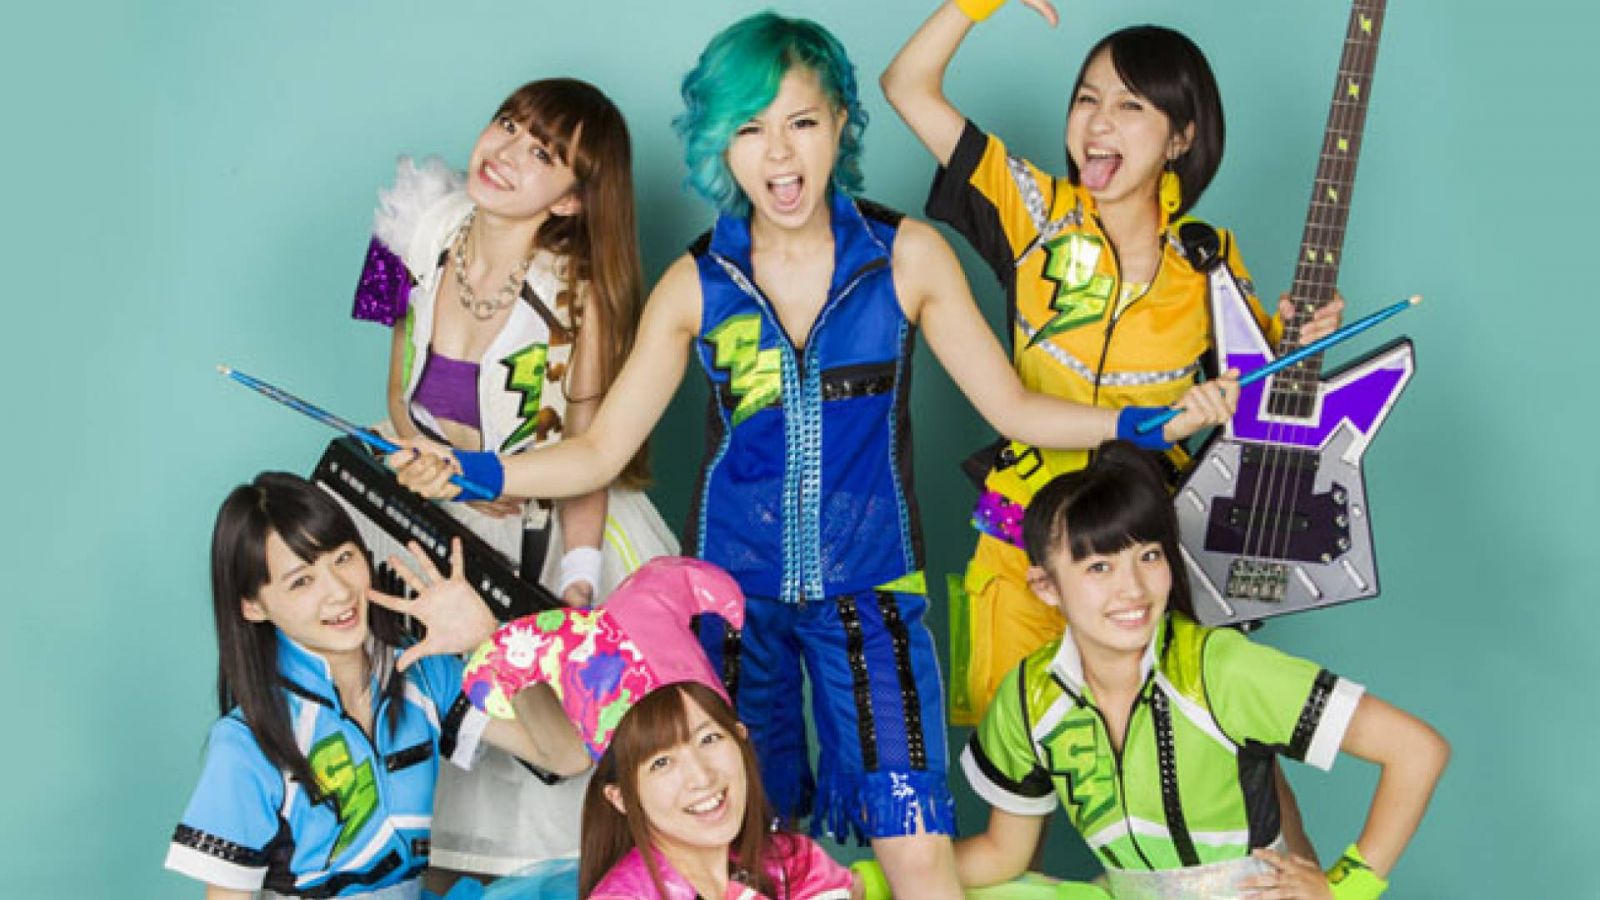 Don't Let Me Down, novo single do Gacharic Spin © Gacharic Spin